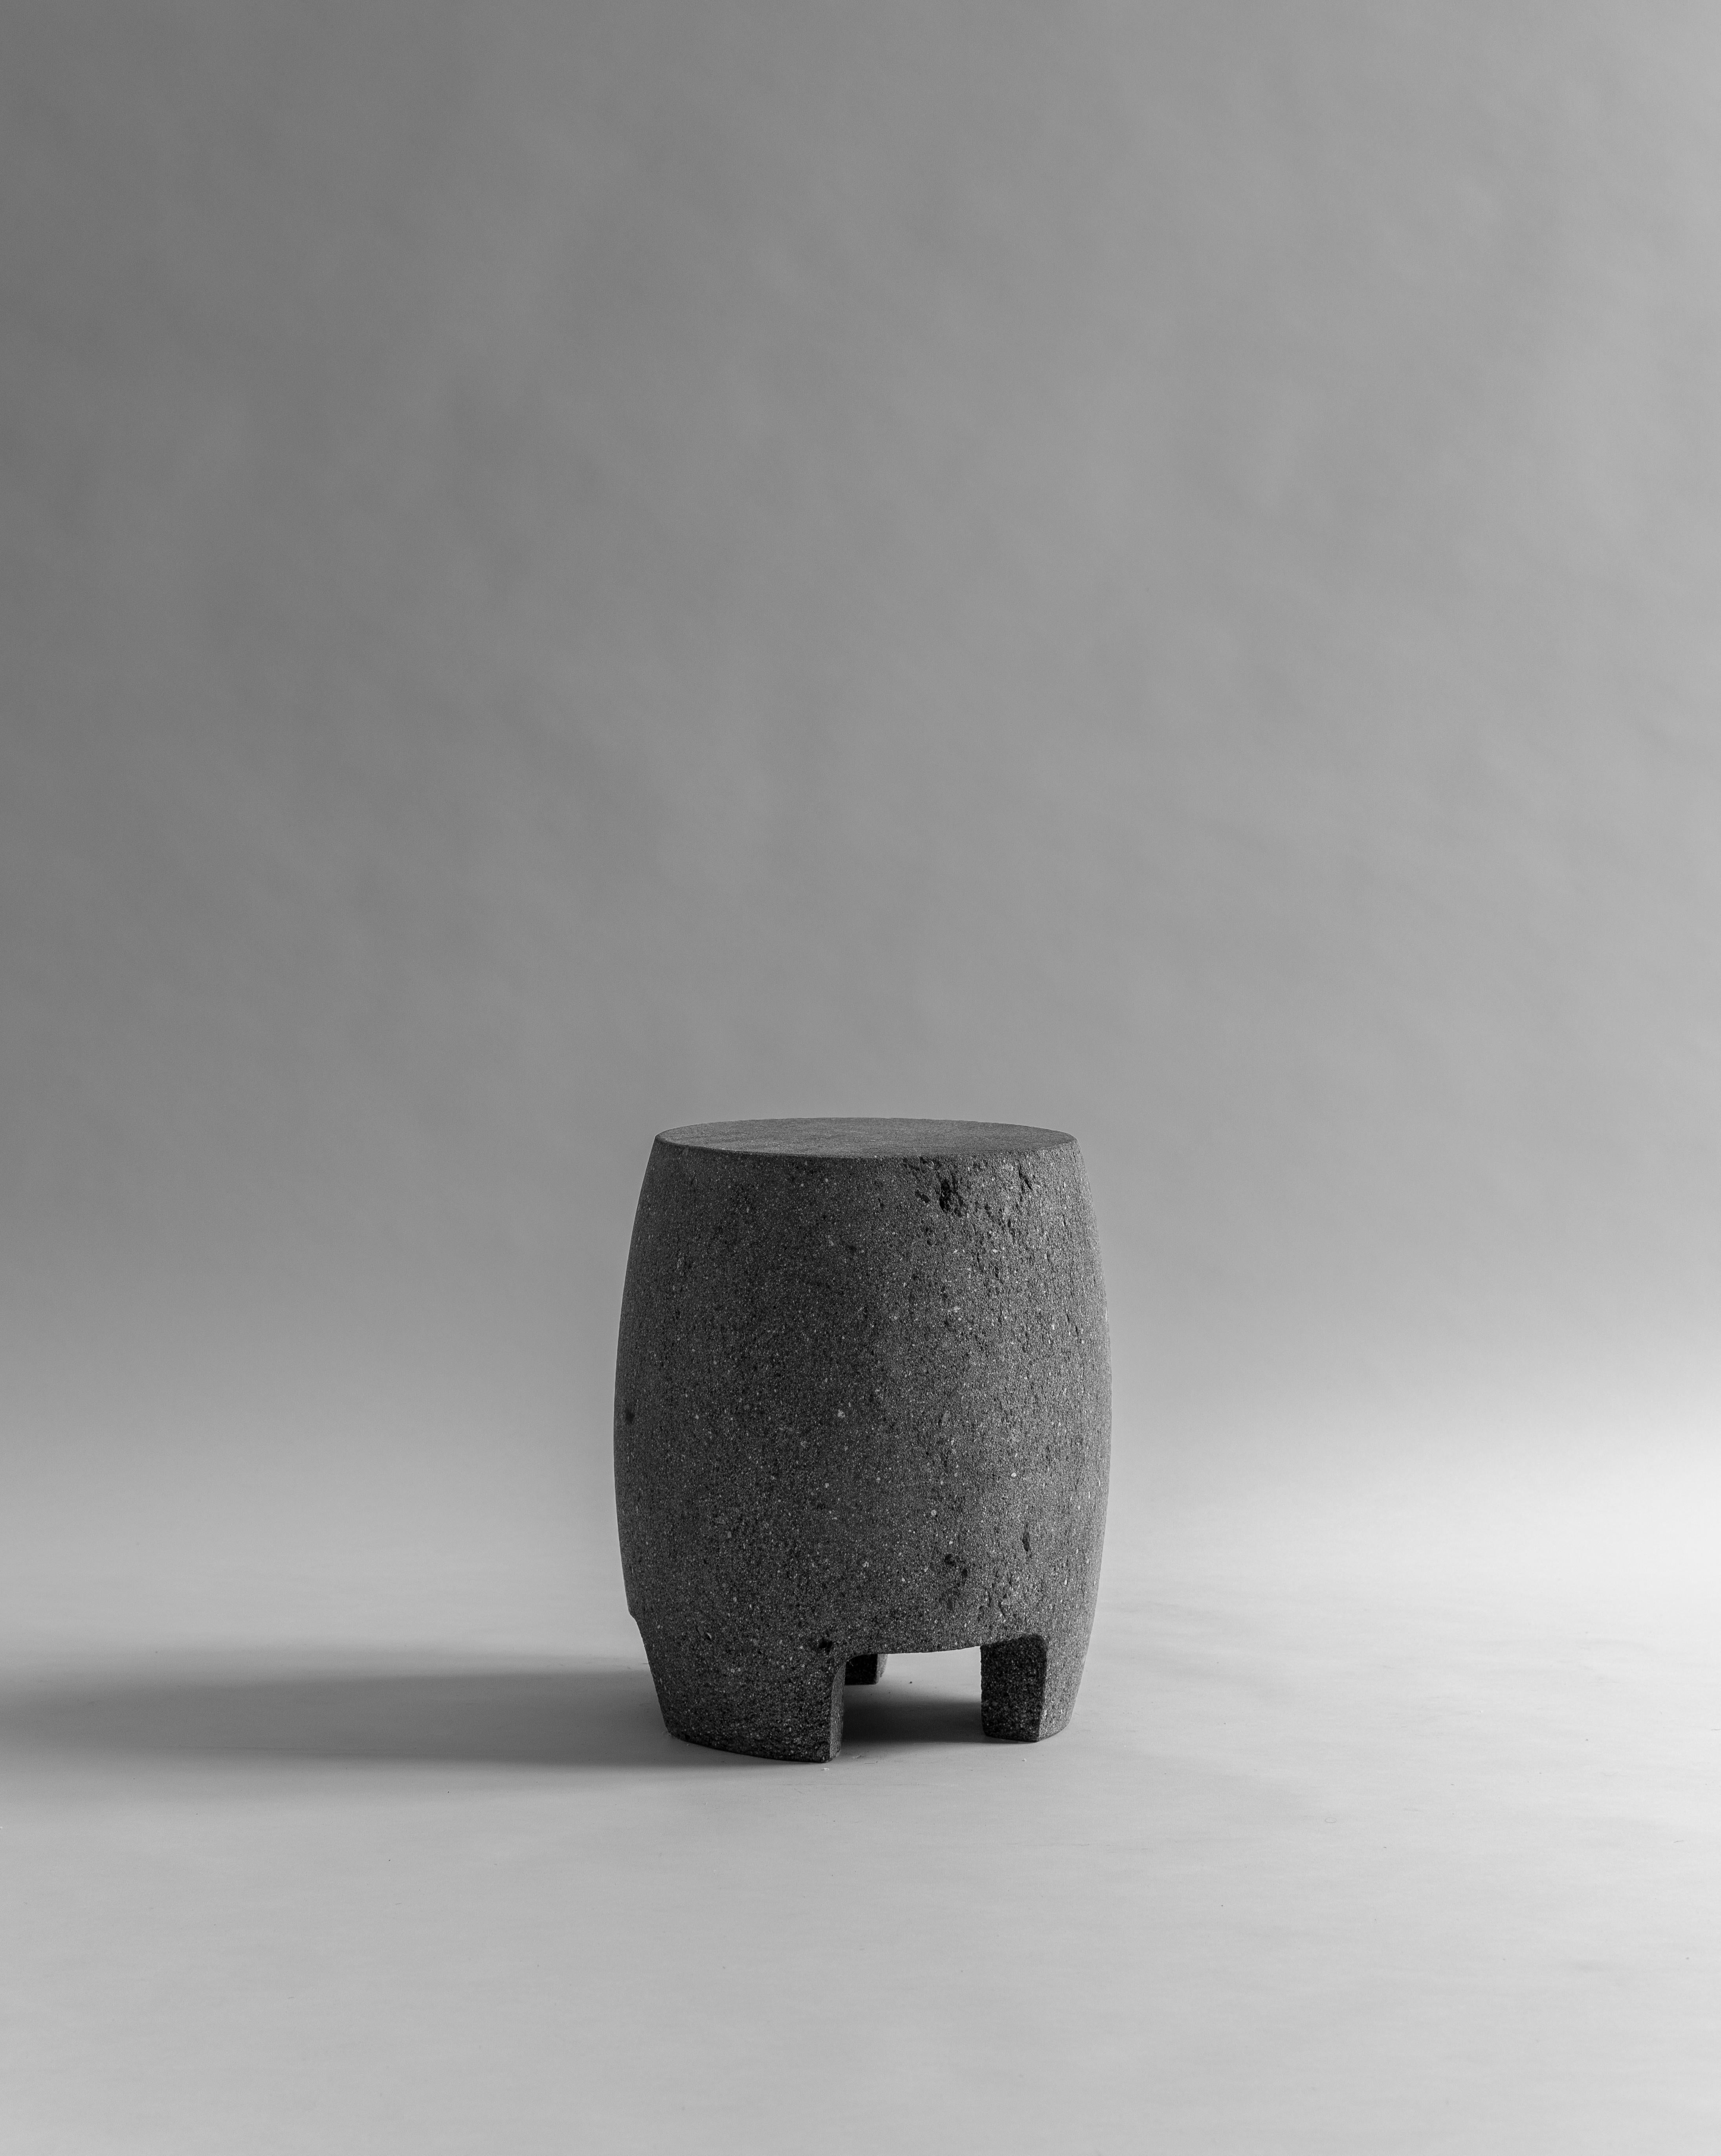 Lava Stool (2022)
By Habitacion 116
51W x 51D x 82H cm
20W x 20D x 32.2H in
Limited Edition
Custom size upon request

Lava Stool, Complementing the LAVA collection and as a direct reference, the Lava Stool is a volcanic rock monolith manually carved